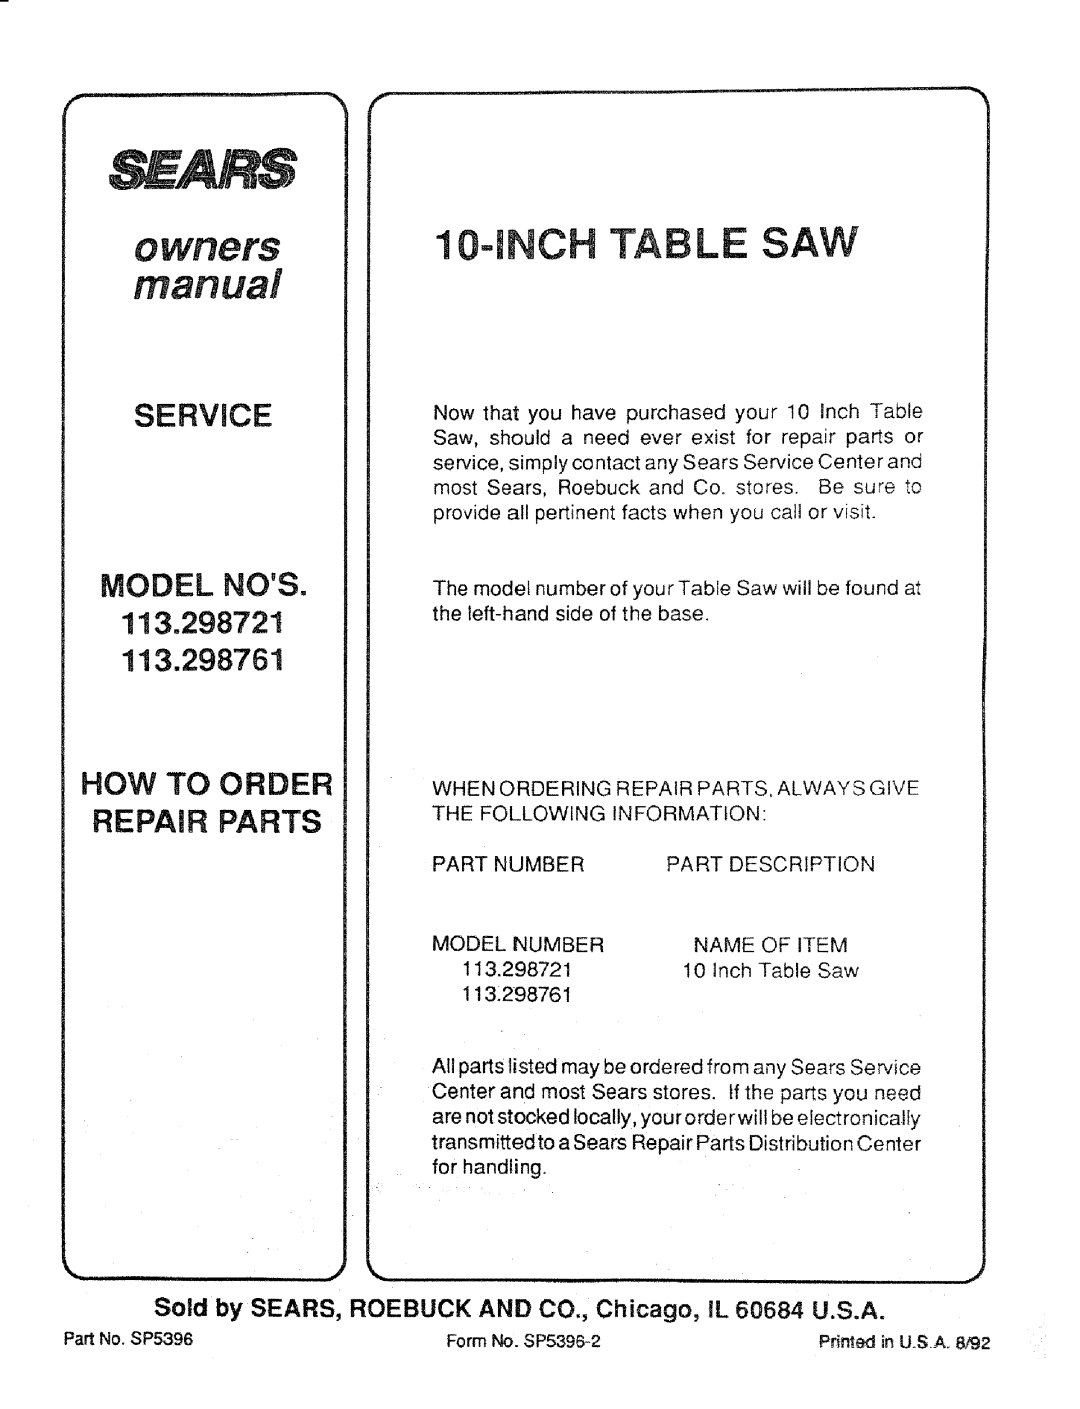 Craftsman 113.298721, 113.298761 How To Order Repair Parts, Service, 113.298721 113.298761, iNCH TABLE SAW, Model Nos 